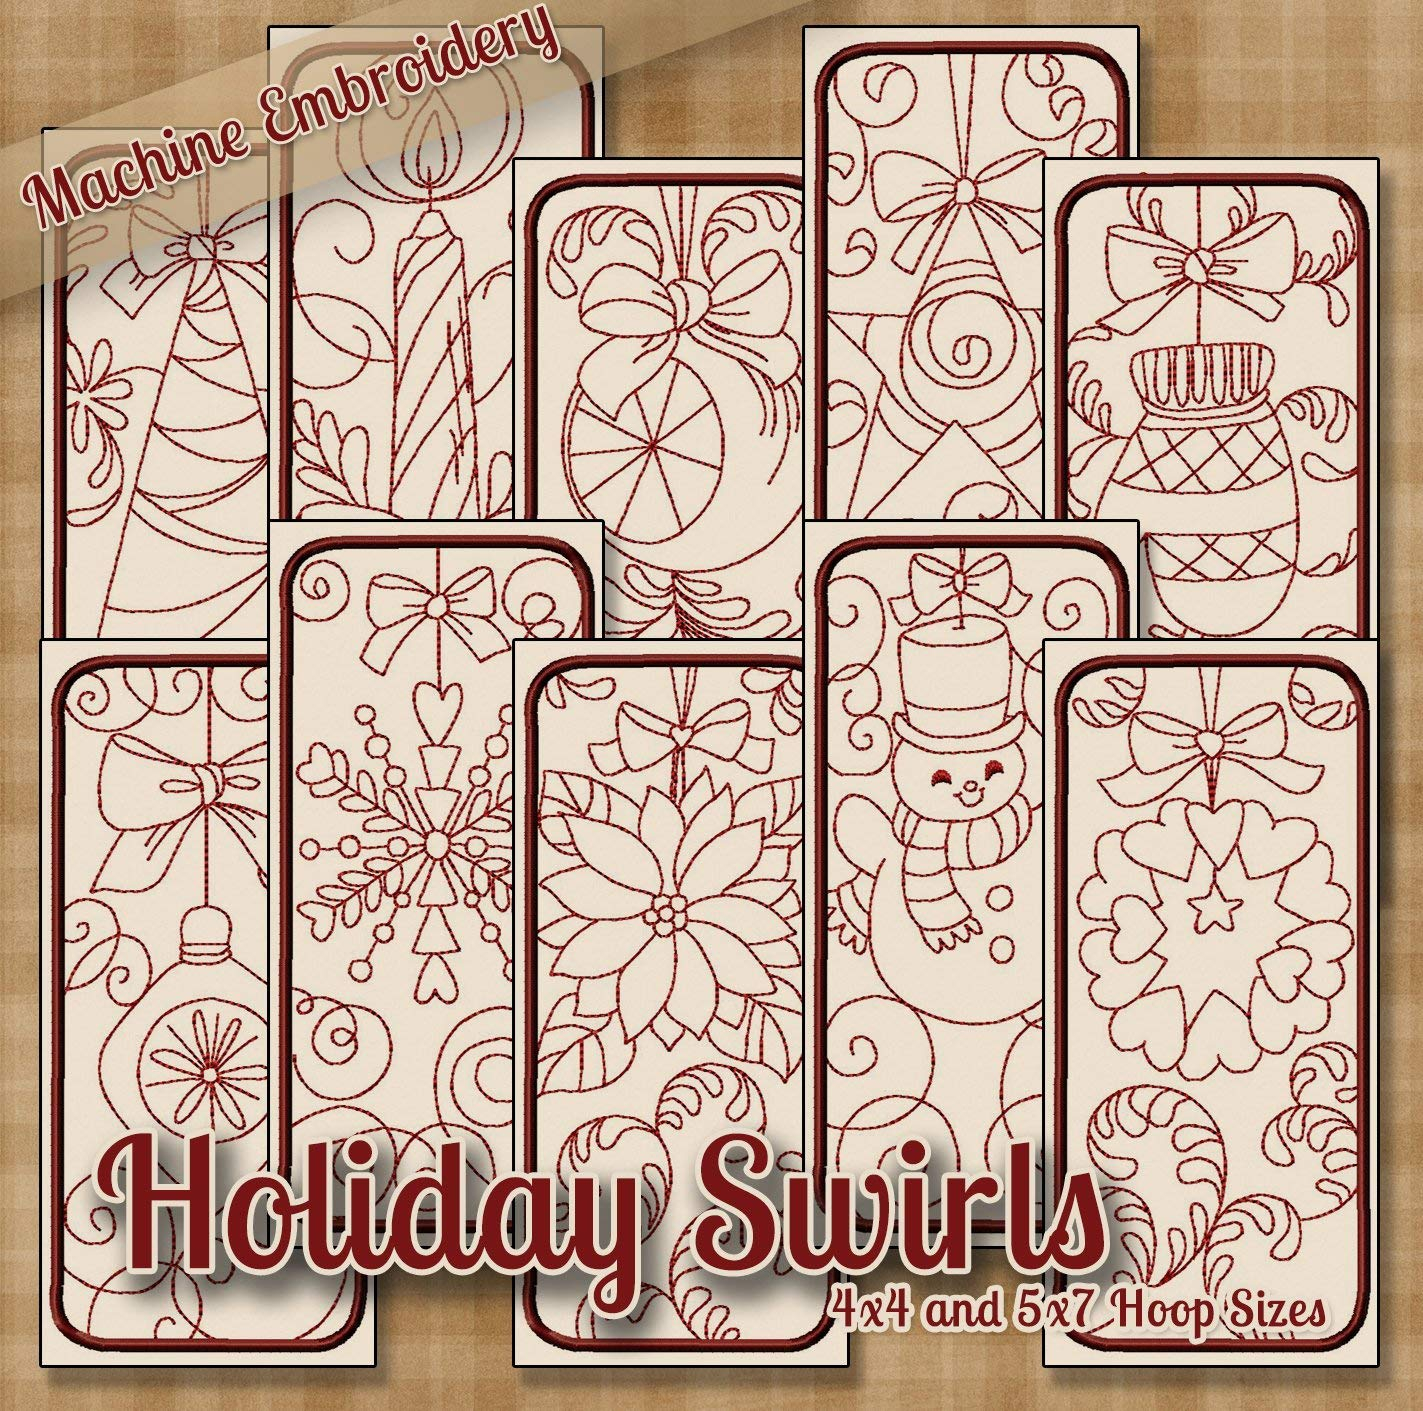 Embroidery Machine Patterns Designs Holiday Swirls Redwork Embroidery Machine Designs On Cd